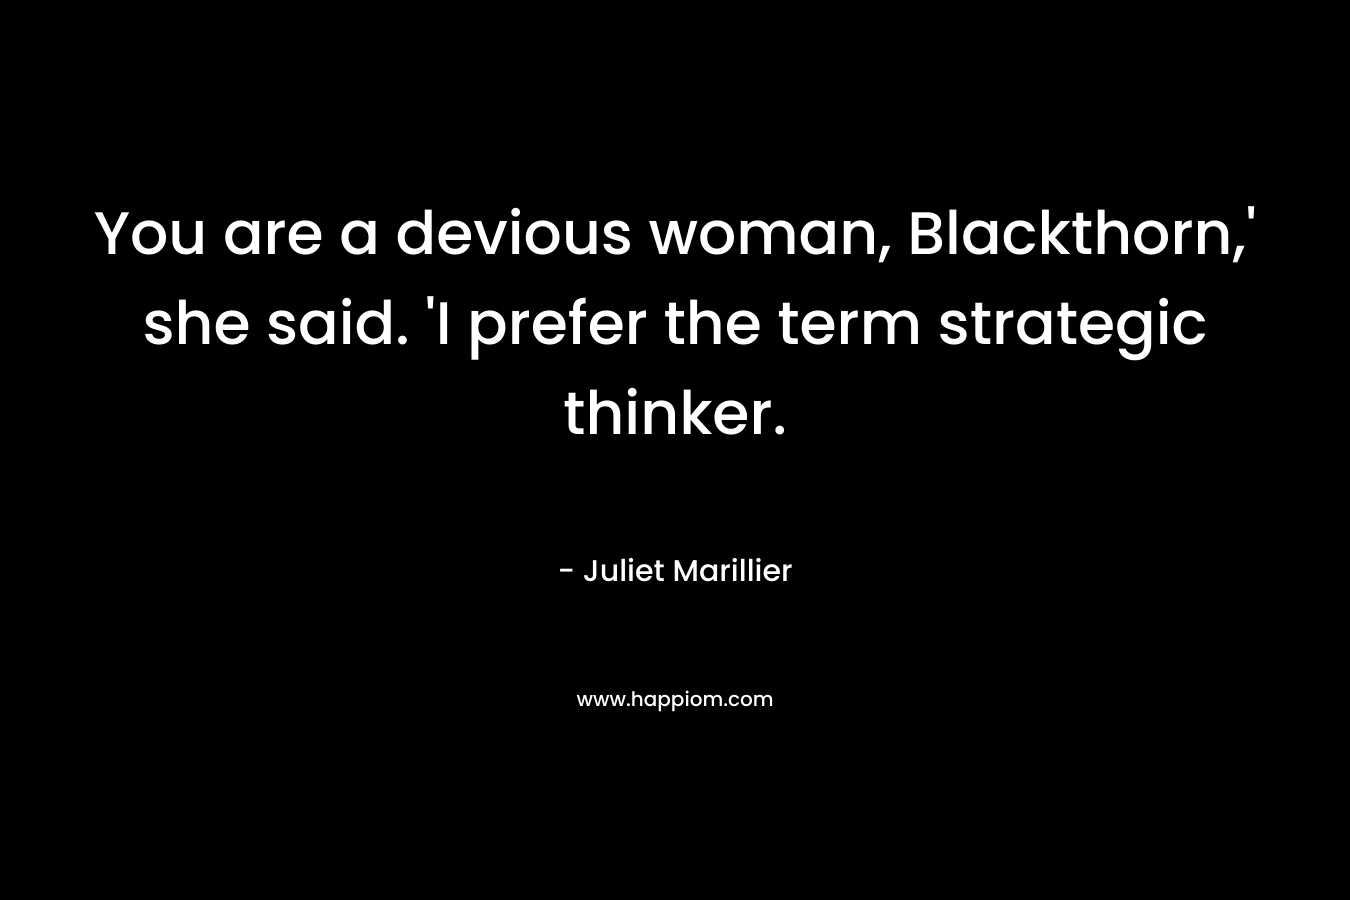 You are a devious woman, Blackthorn,’ she said. ‘I prefer the term strategic thinker. – Juliet Marillier